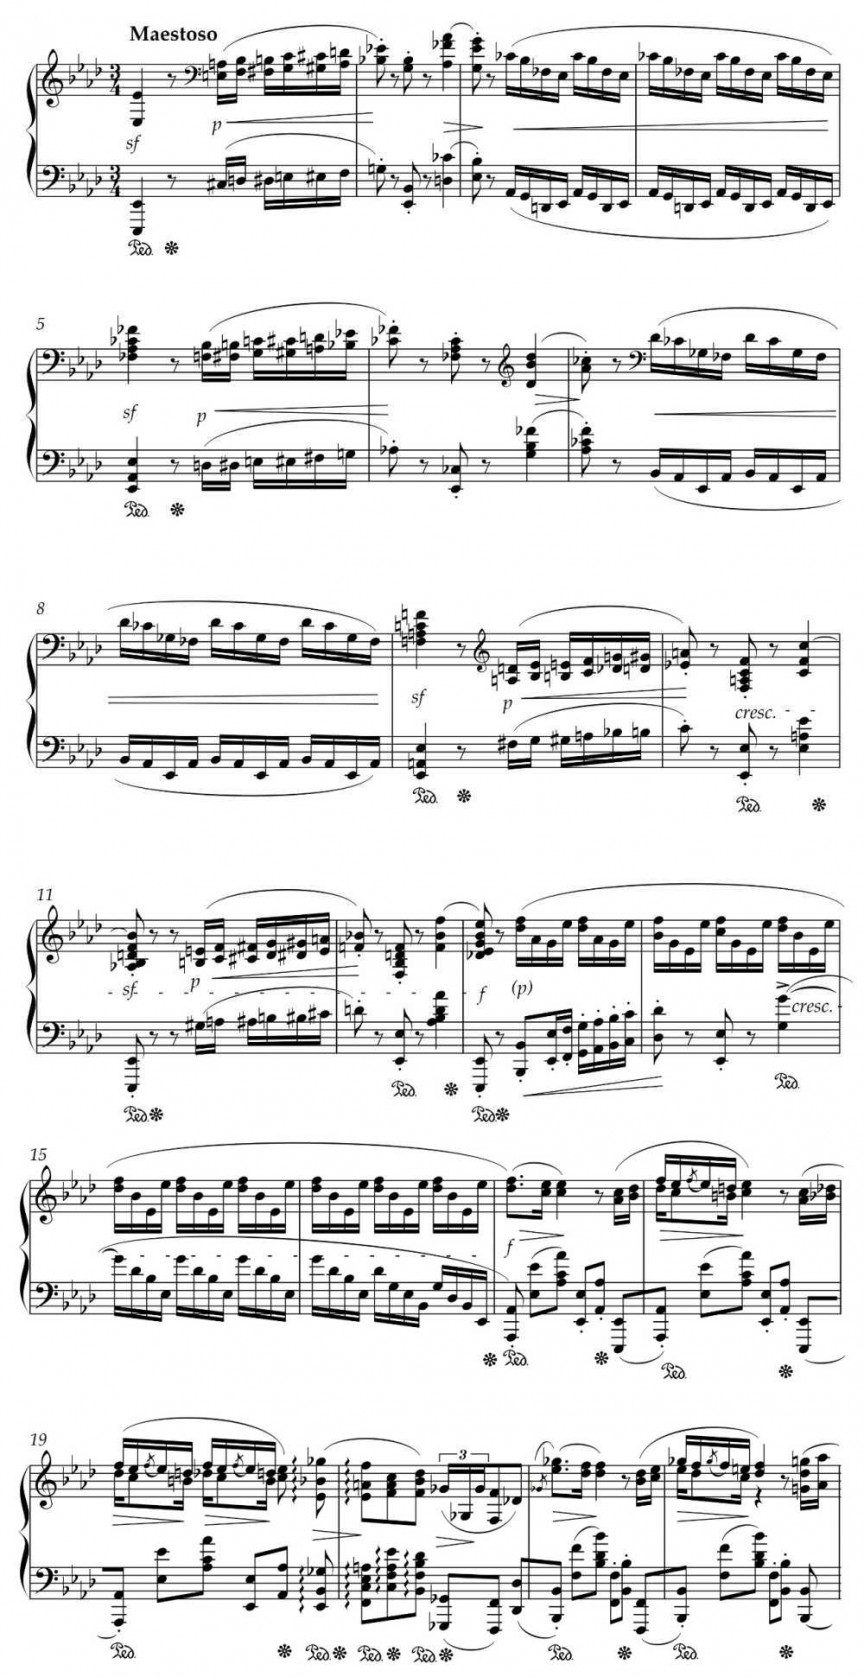 Ex. 3: Frederic Chopin: Polonaise in A flat major, Op. 53 “Heroic”. Bar 17 is the moment of arrival; graph shows tempi for bars 9-24.